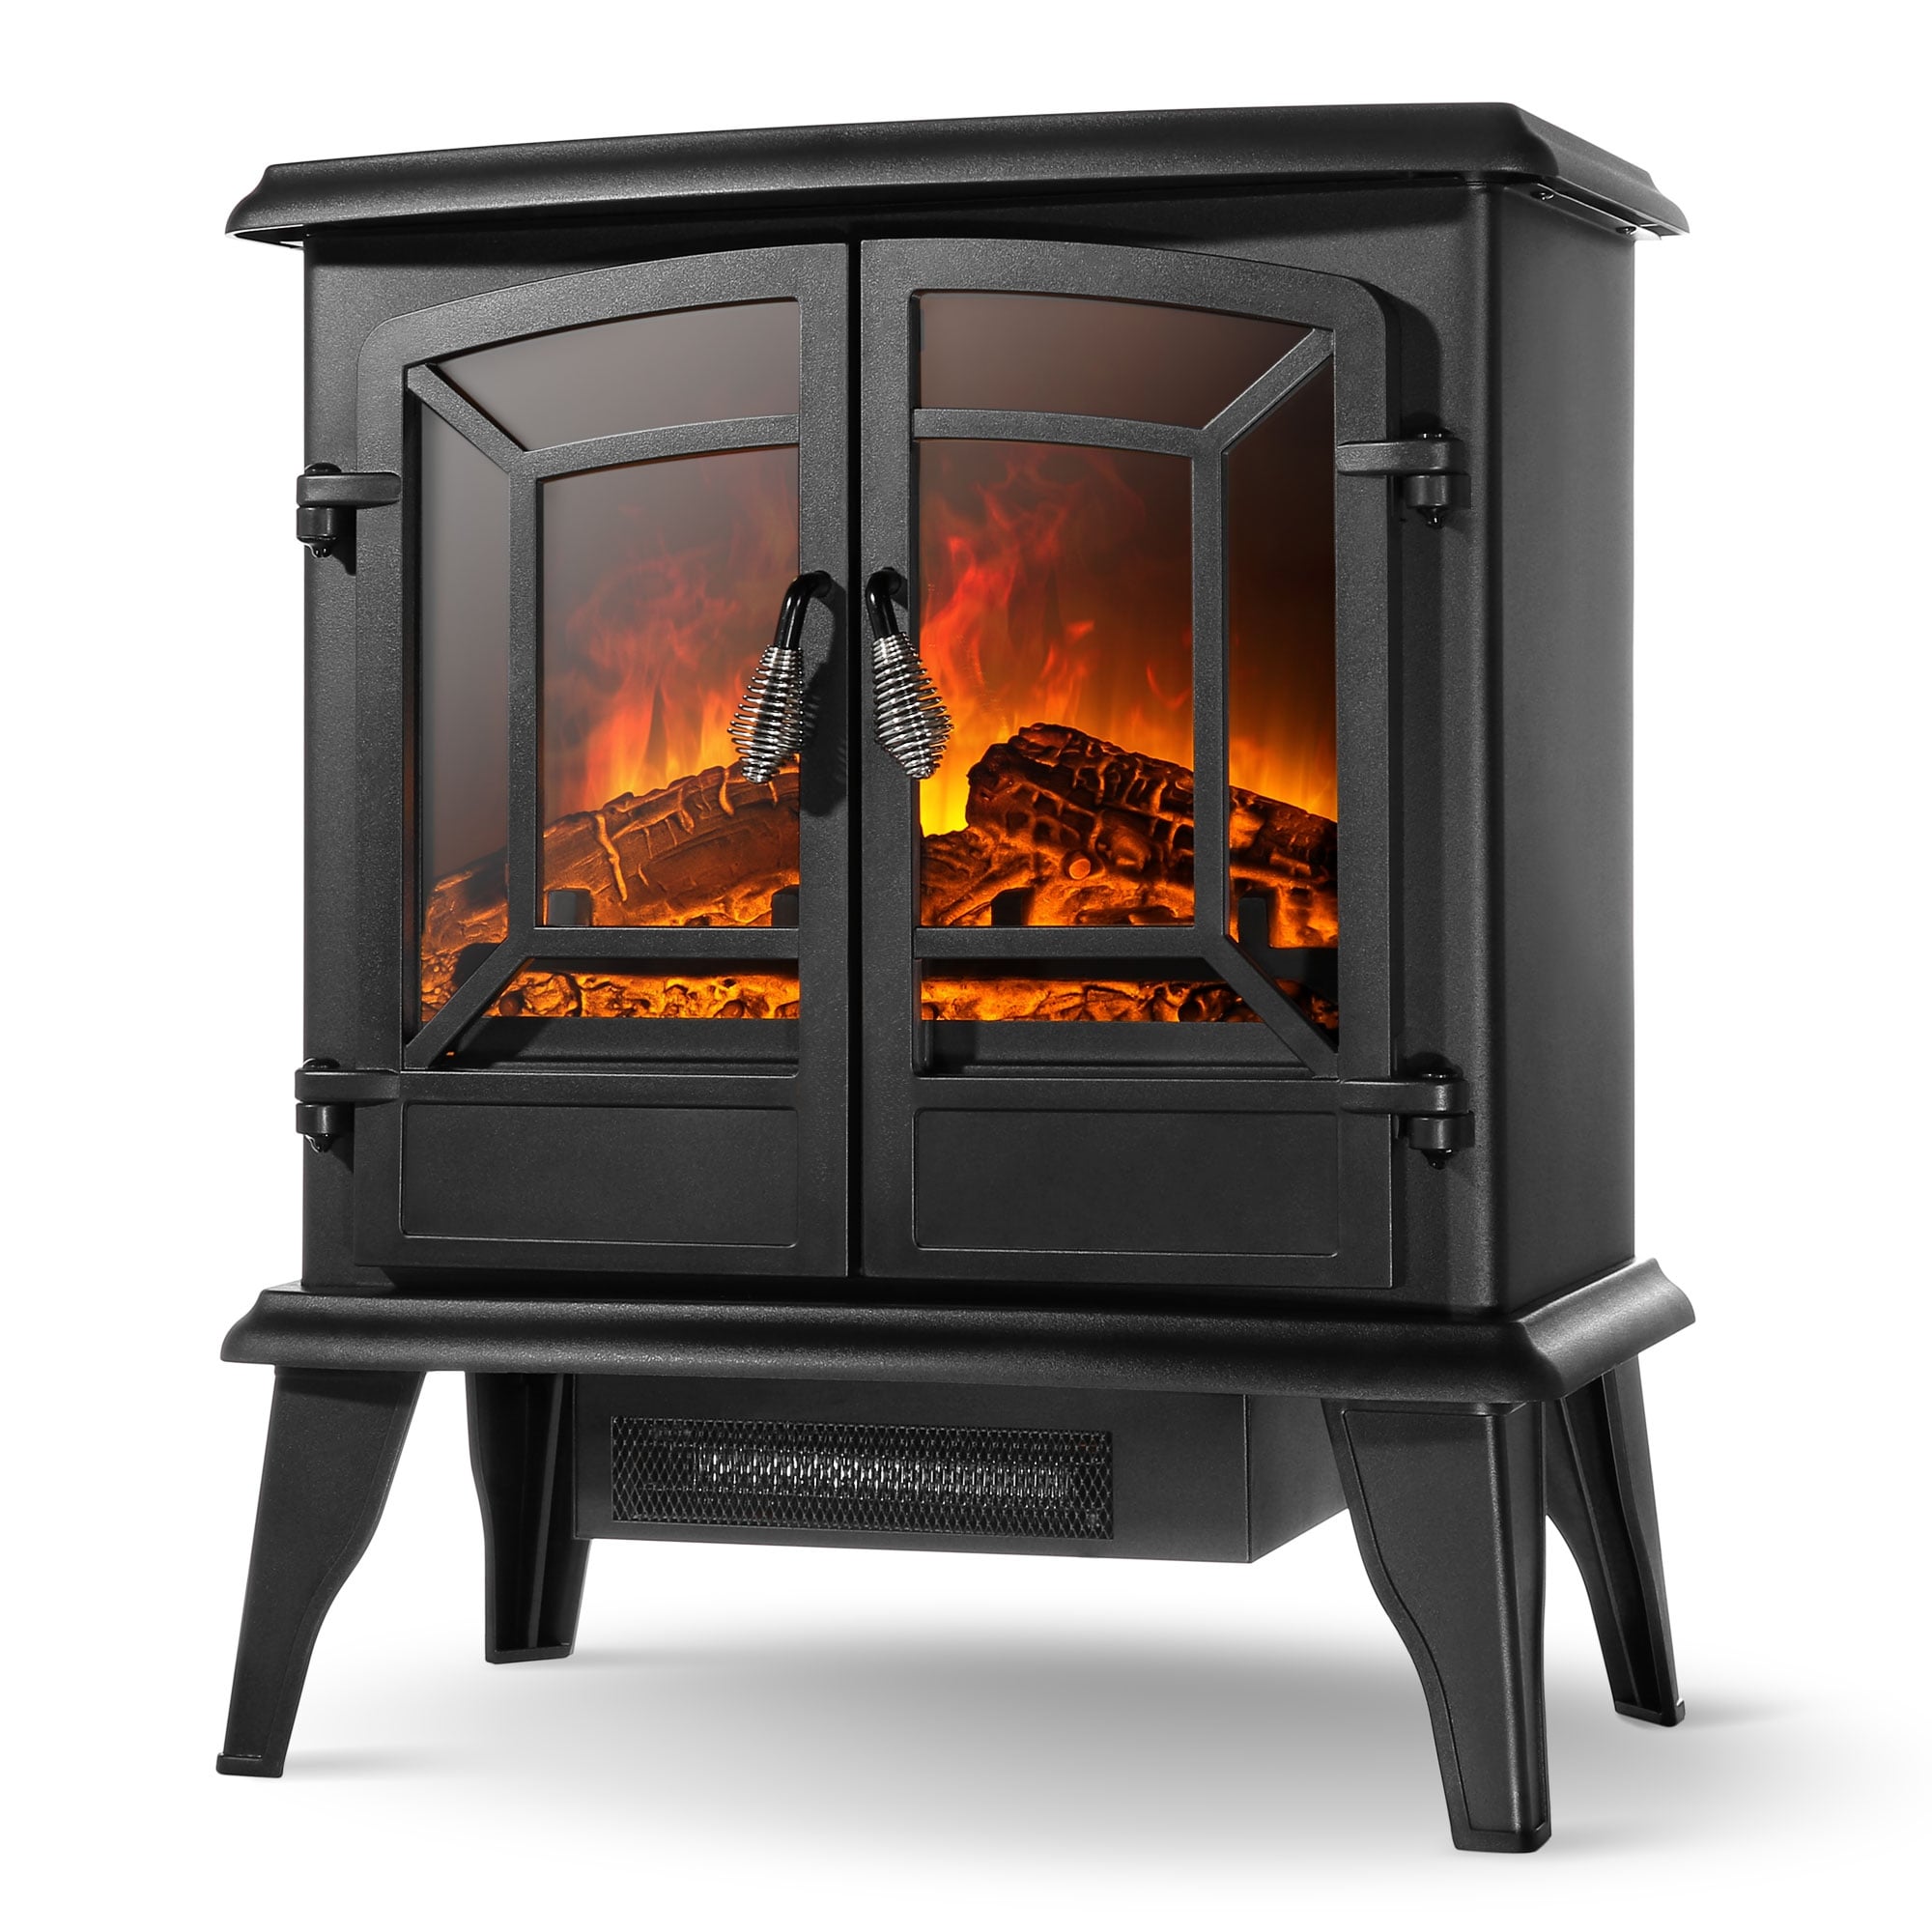 VonHaus Electric Fireplace Stove Heater with Flame Effect White 1850W Portable Freestanding Fire Place Log Burner Light